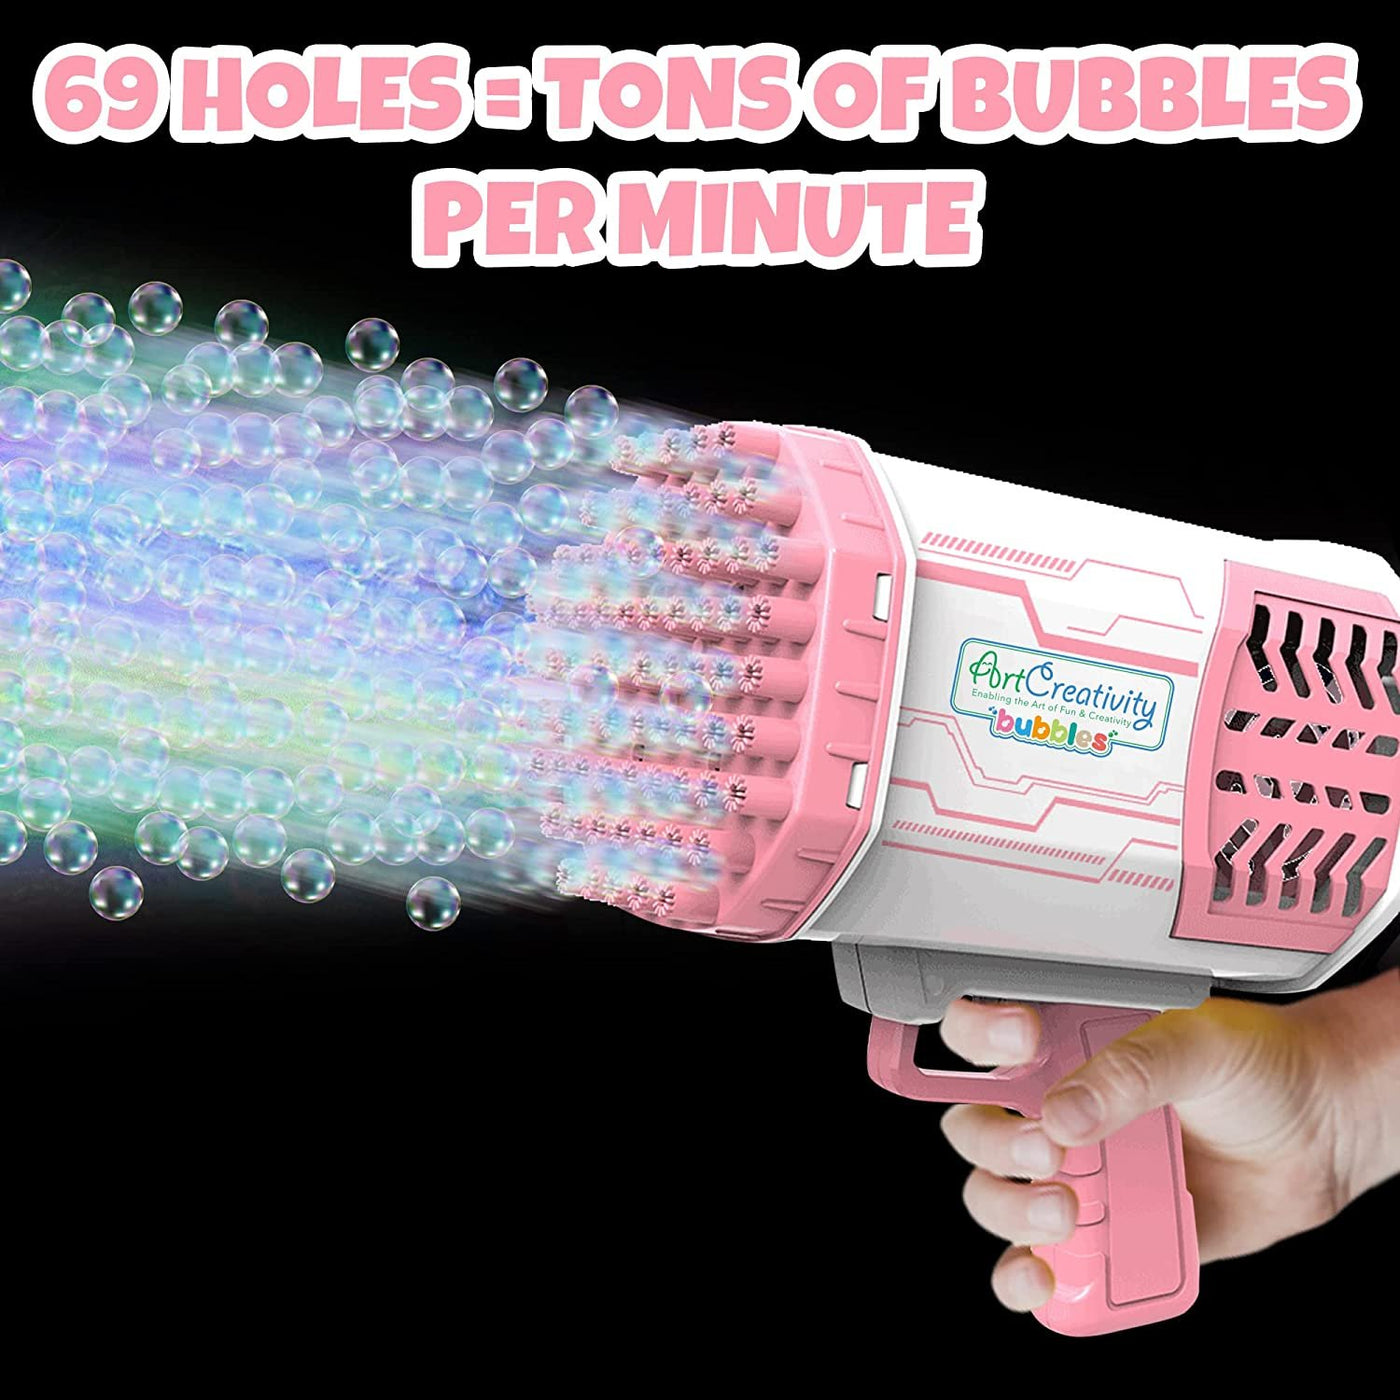 Bazooka Bubble Gun Blaster, 69 Holes Rocket Boom Giant Bubble Blower Gun with Colorful Lights, Bubble Machine Gun, Great Gift for Summer Outside Outdoor Toys for Kids Ages 4 5 6 7 8 + and Adults